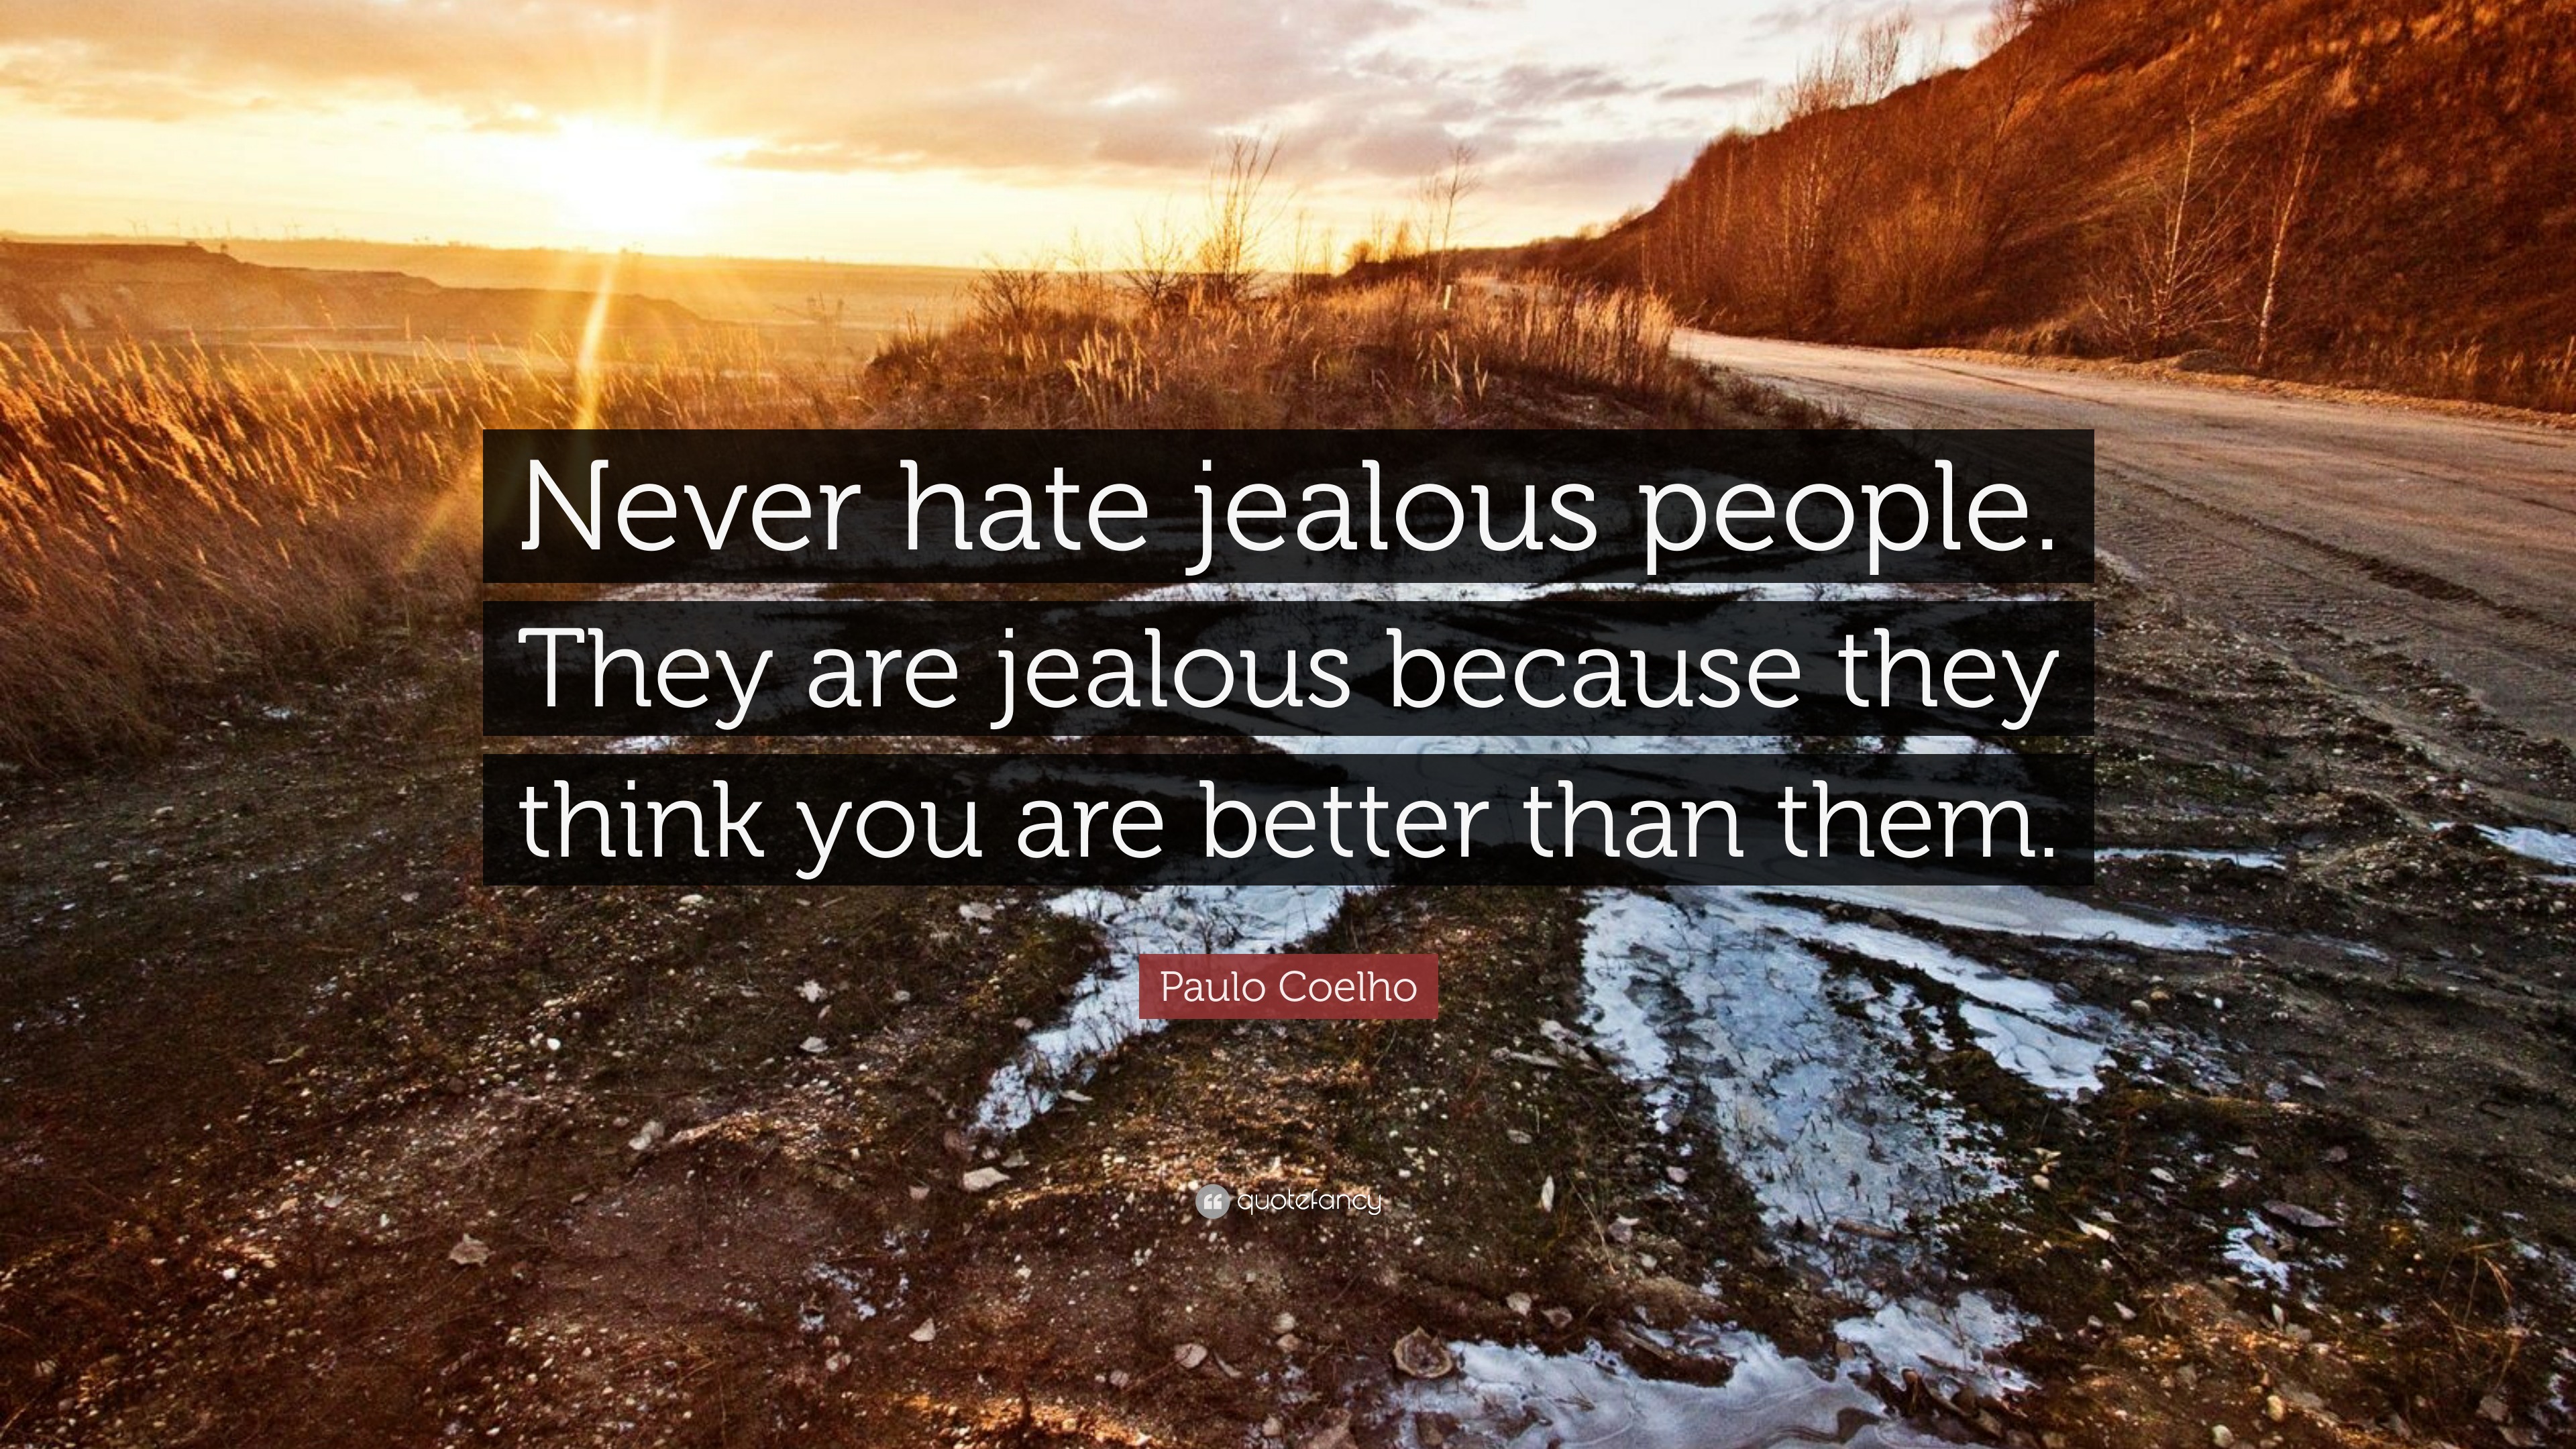 Paulo Coelho Quote: “Never hate jealous people. They are jealous